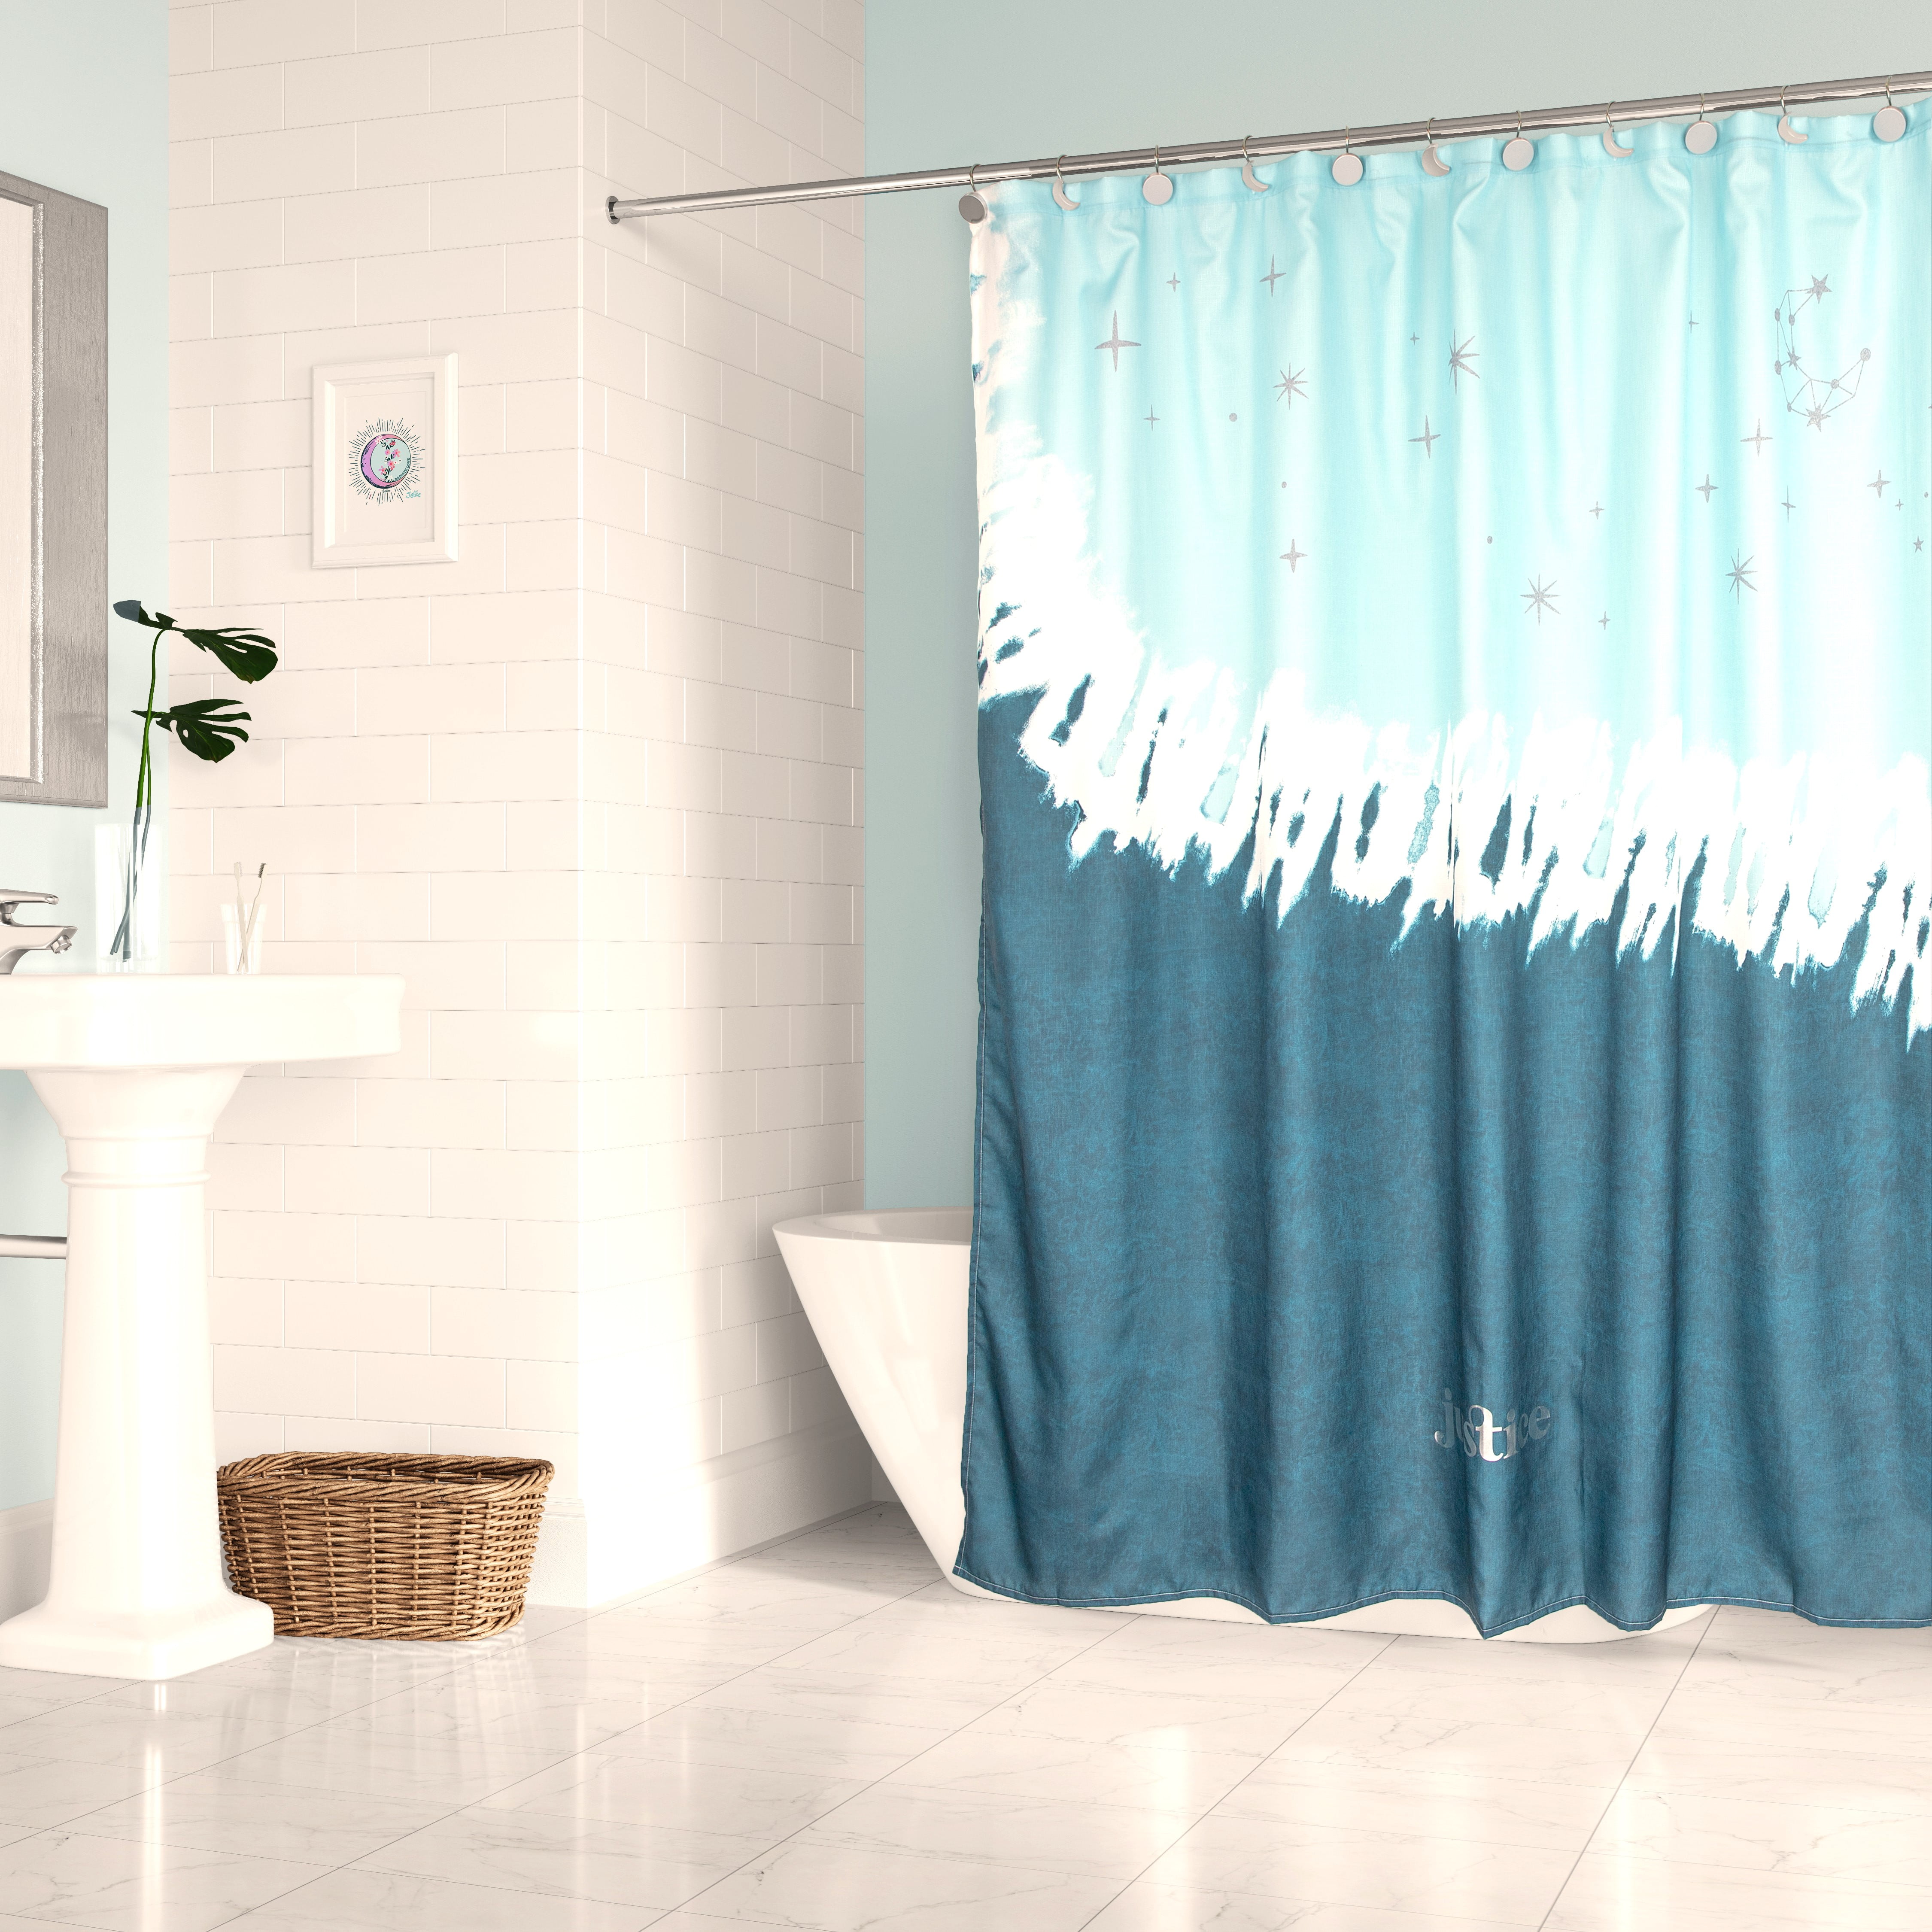 Stylish Plain Shower Bathroom Curtain Liner with 12 Matching Hook Ring Set 